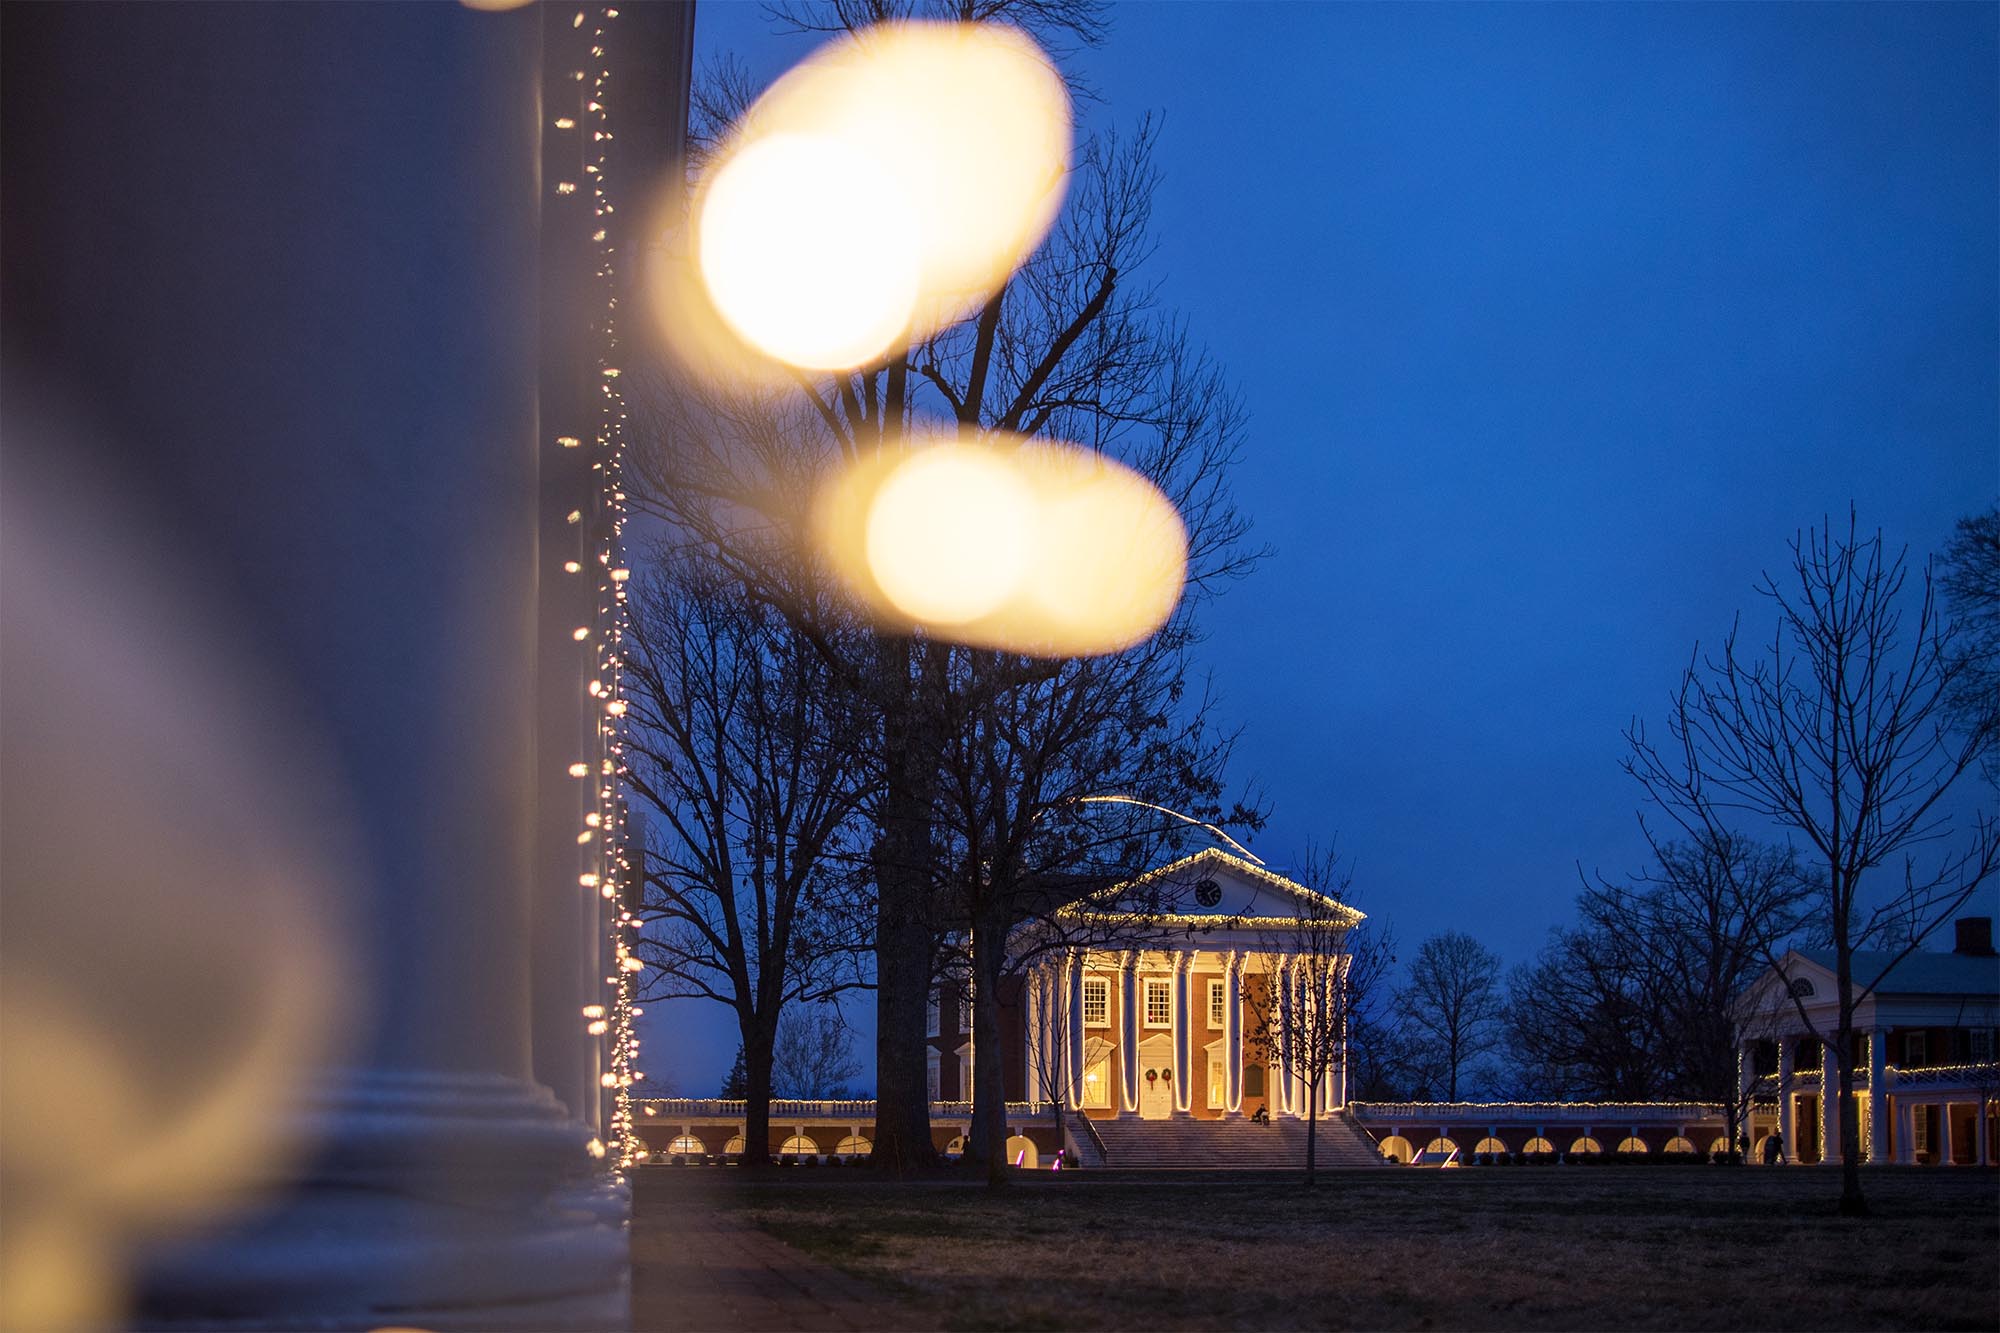 The 20th annual Lighting of the Lawn, set for Dec. 6, is open to members of the University community. (Photo by Sanjay Suchak, University Communications)